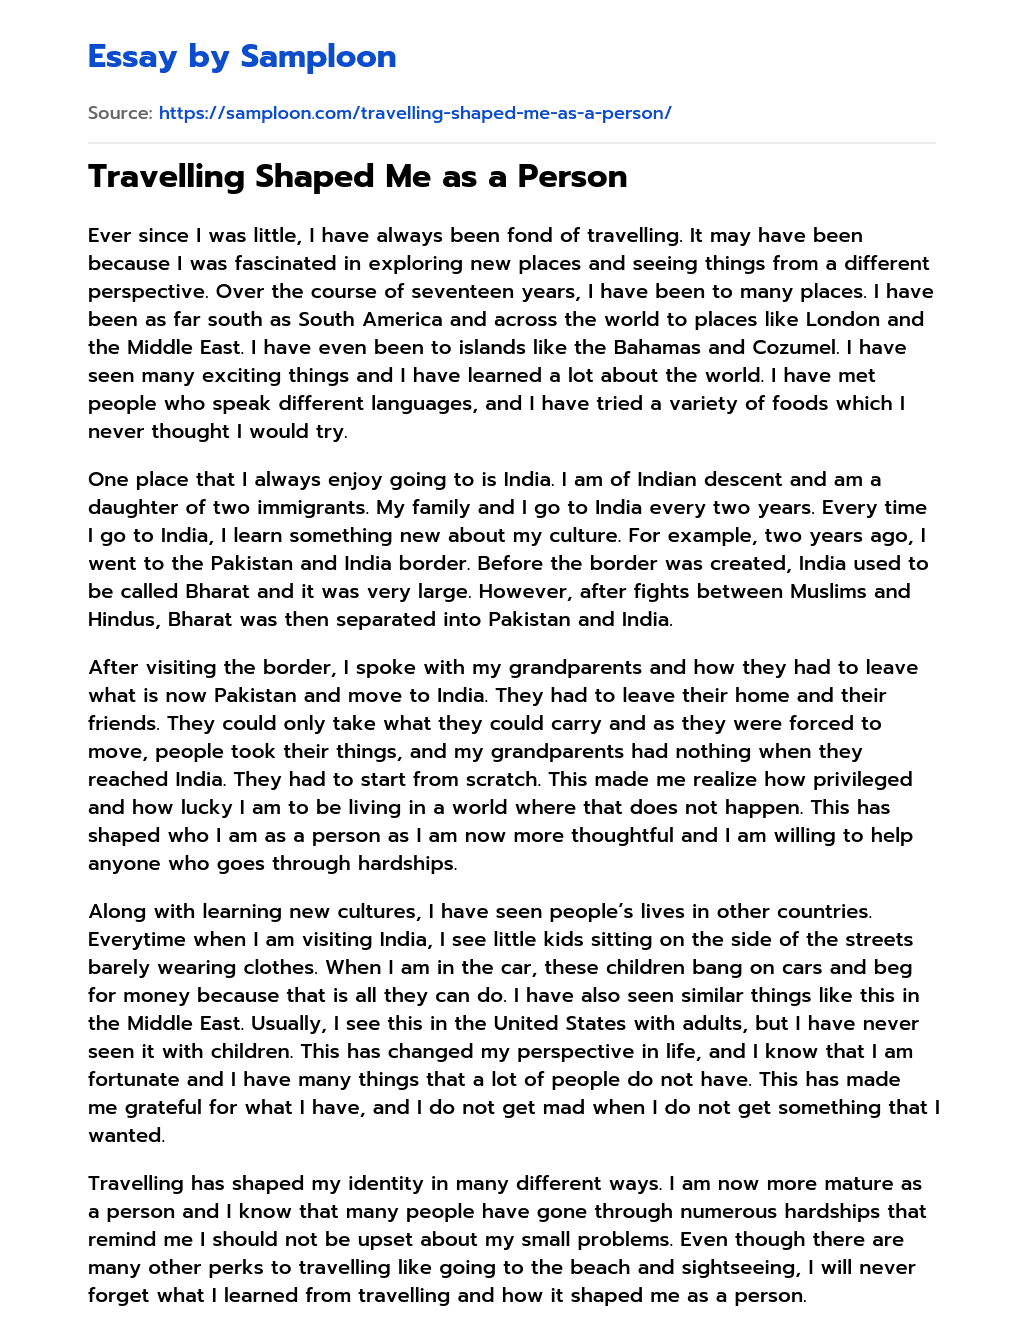 Travelling Shaped Me as a Person essay